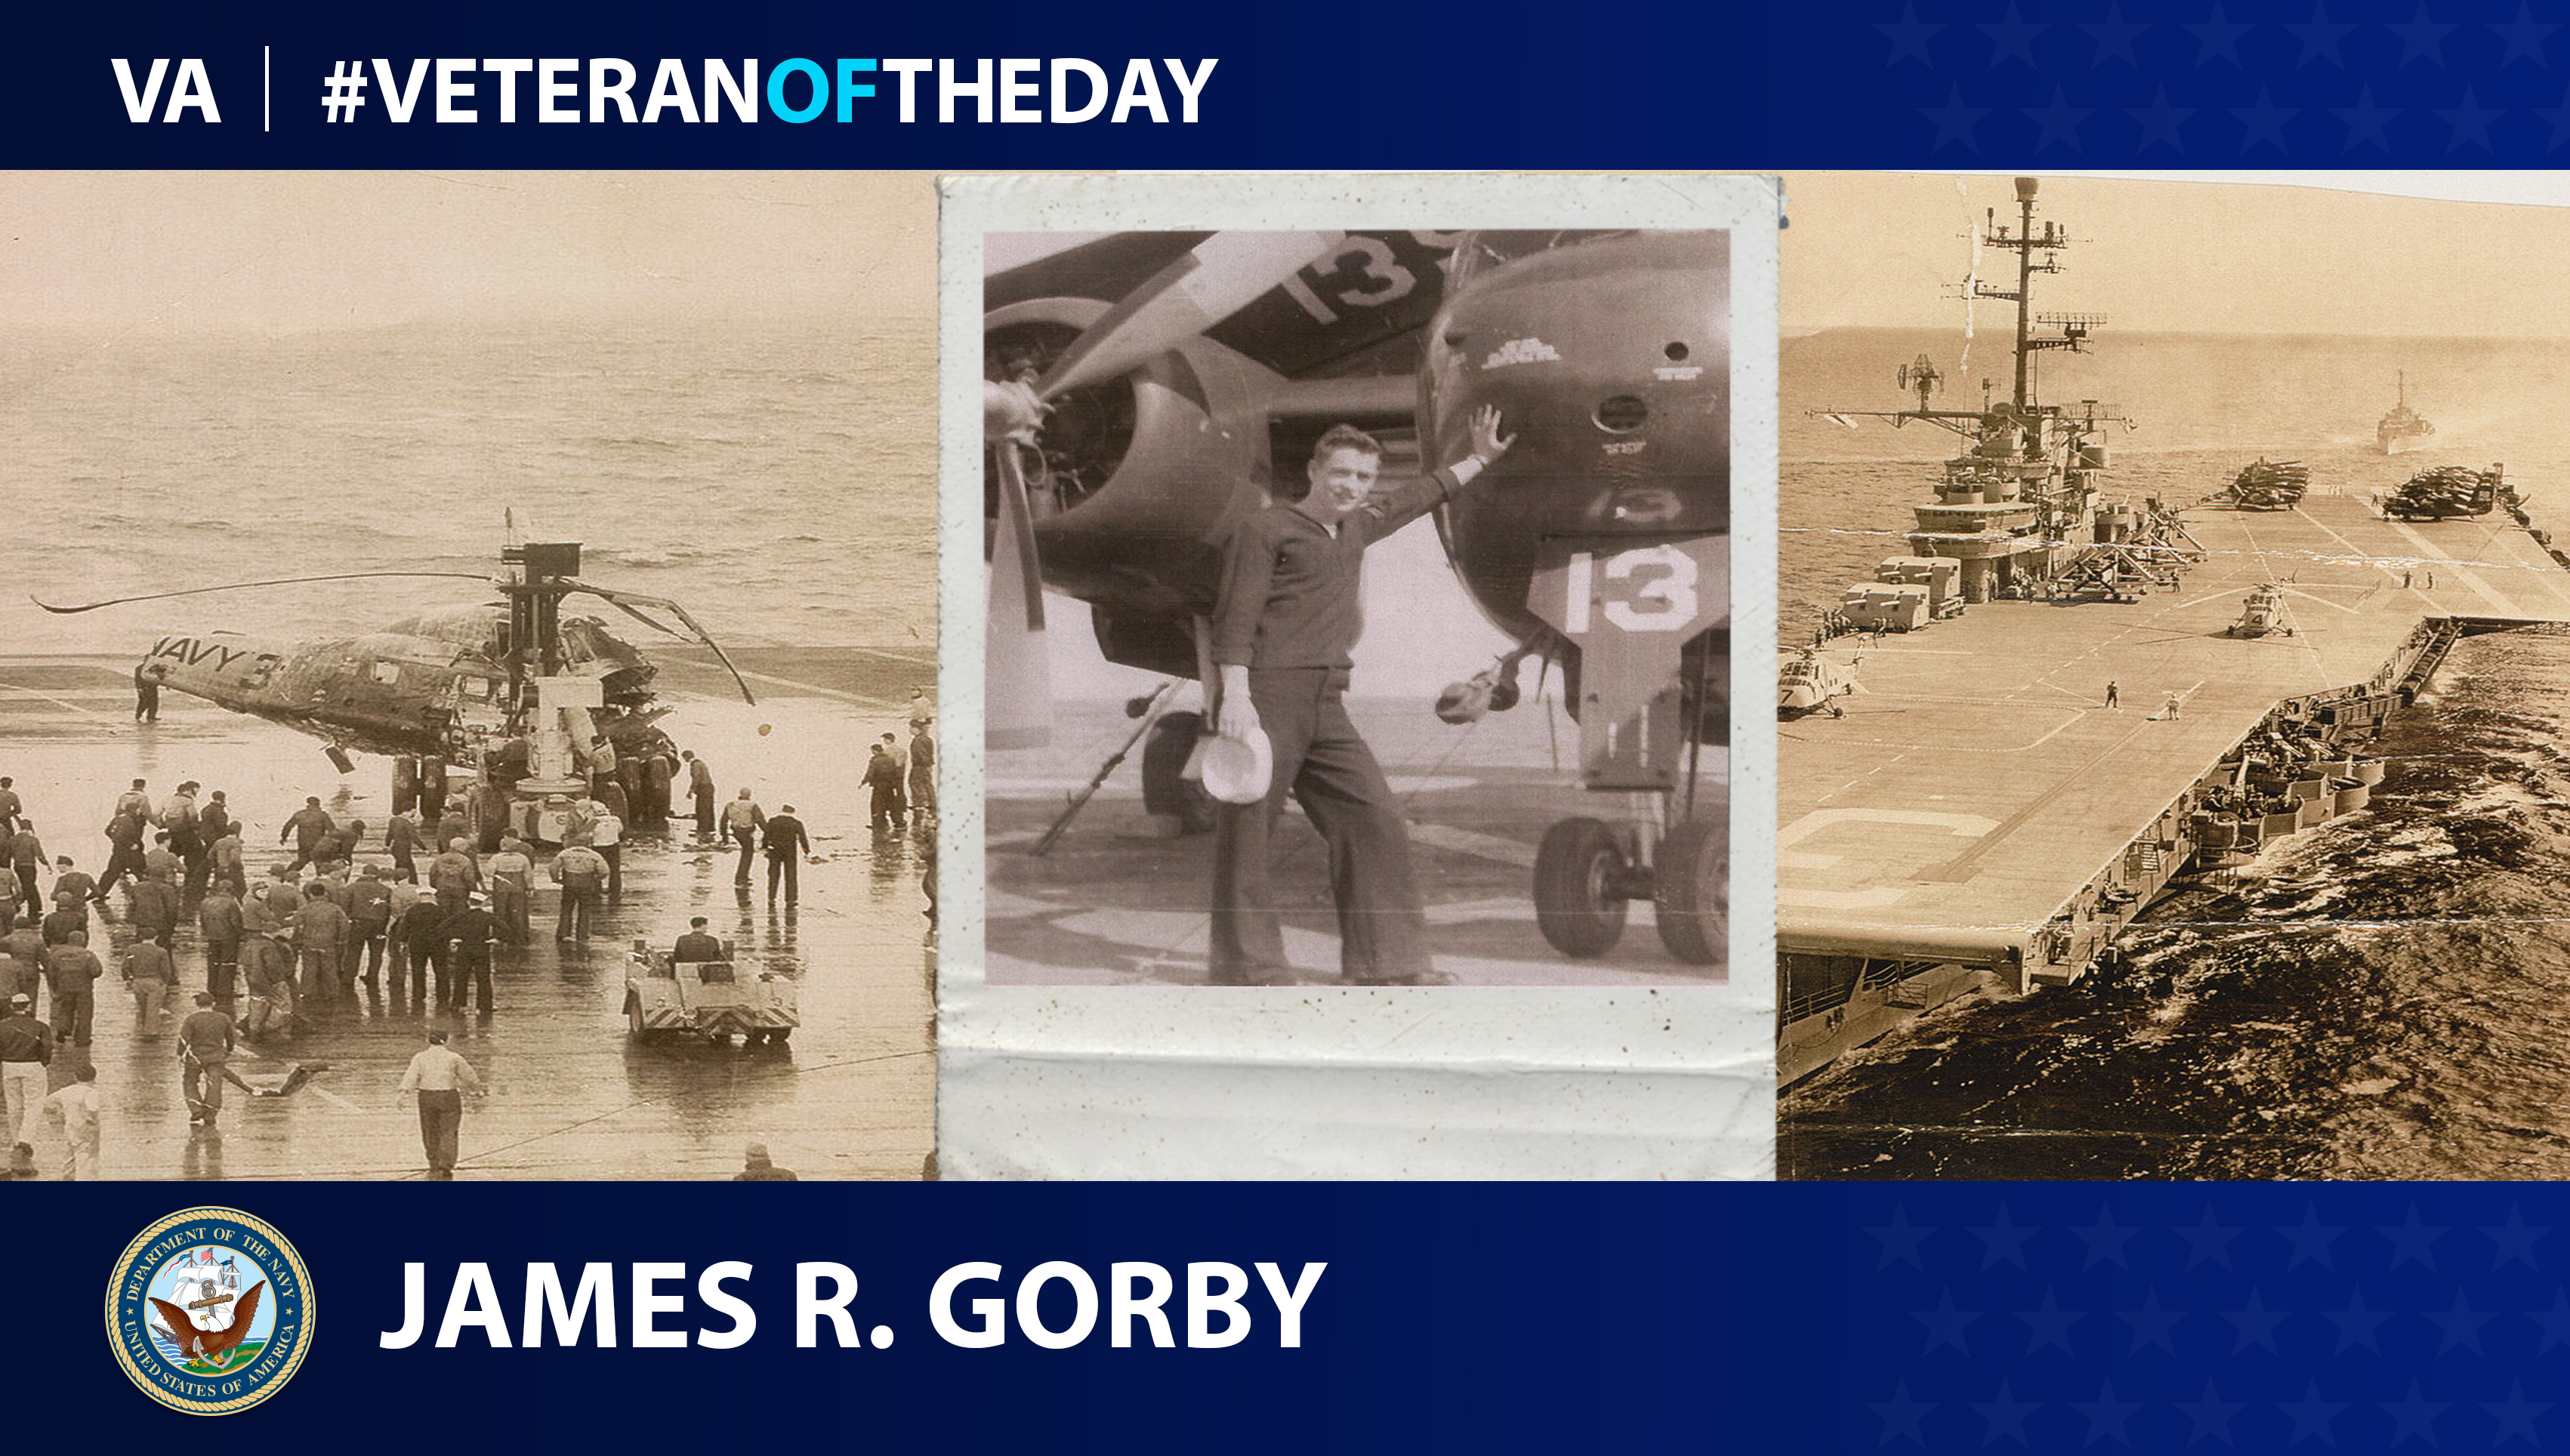 Navy Veteran James R. Gorby is today's Veteran of the Day.